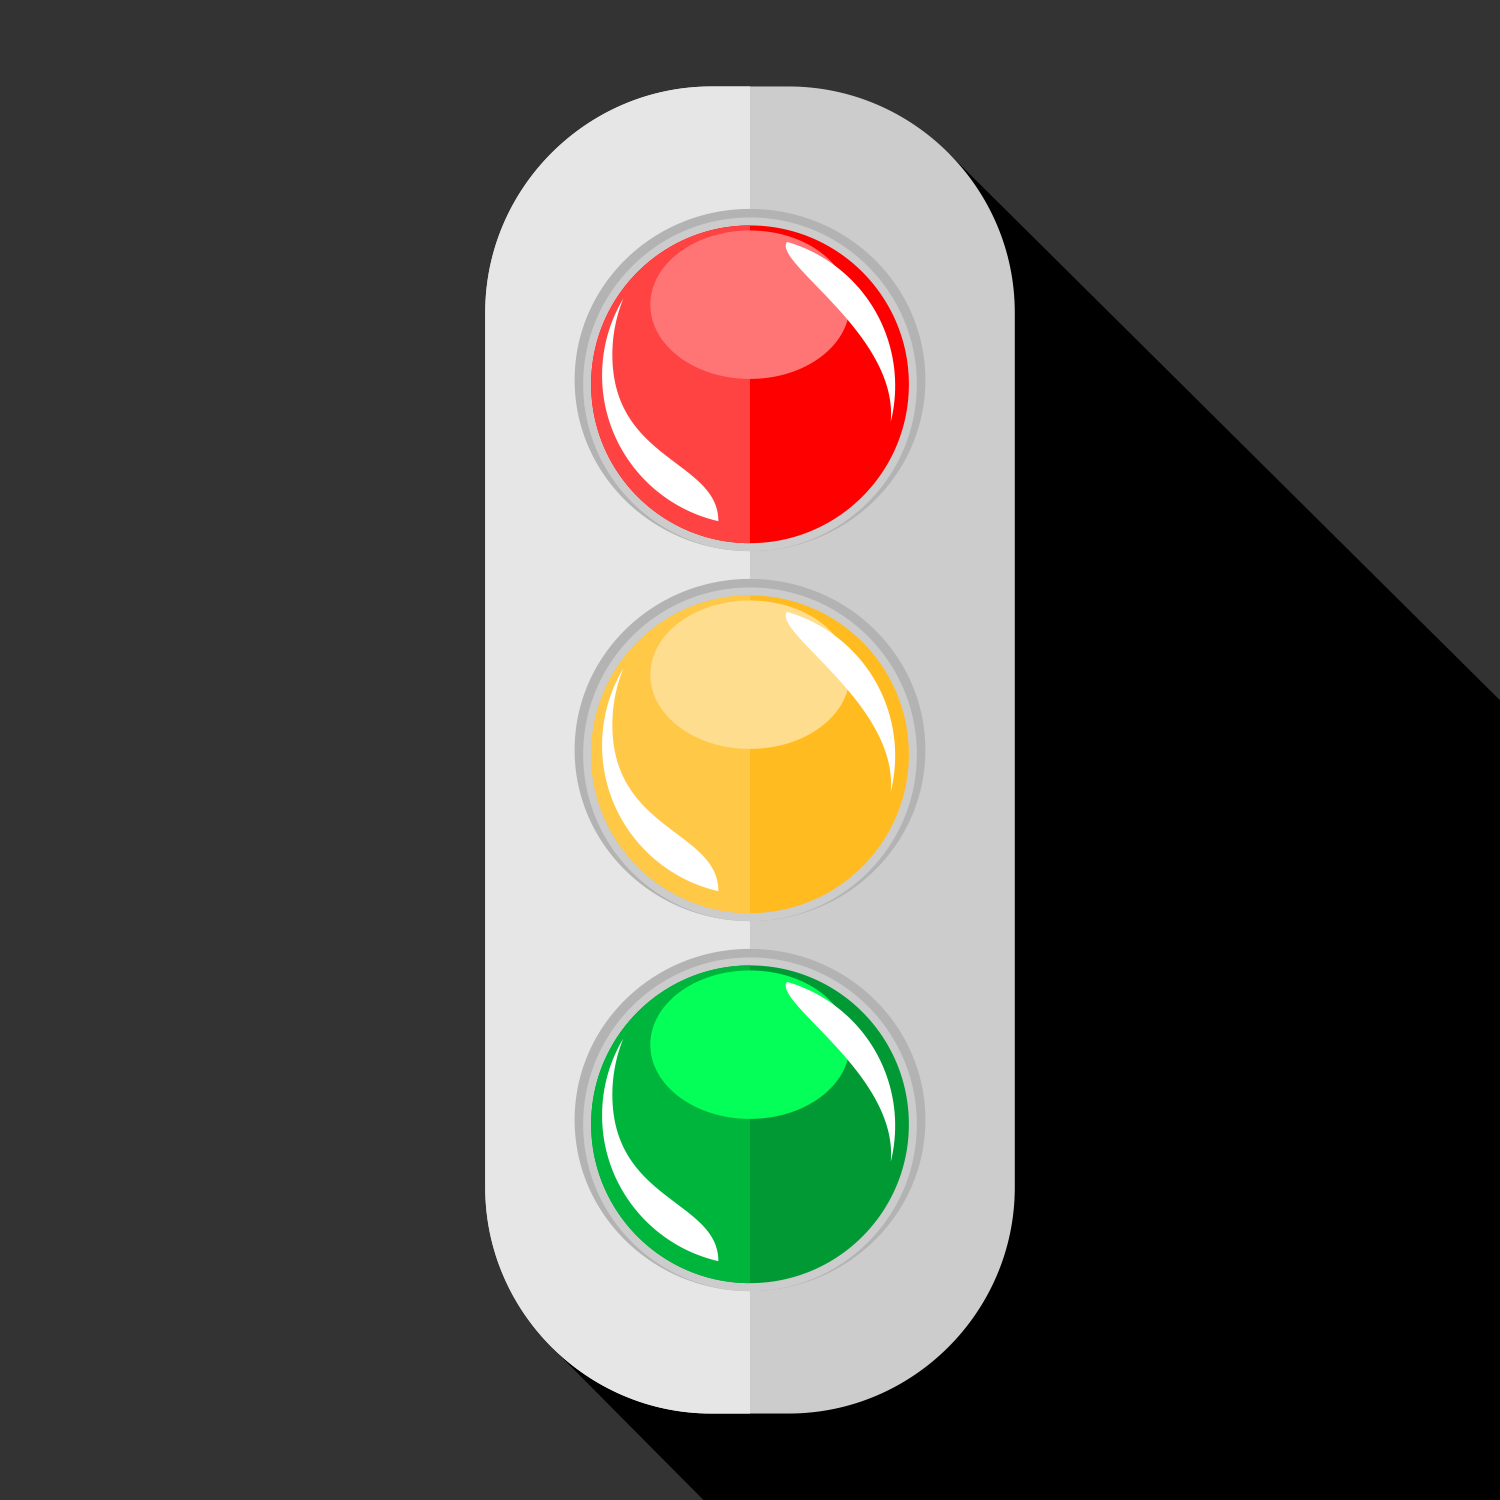 Traffic light icon #5887 - Free Icons and PNG Backgrounds